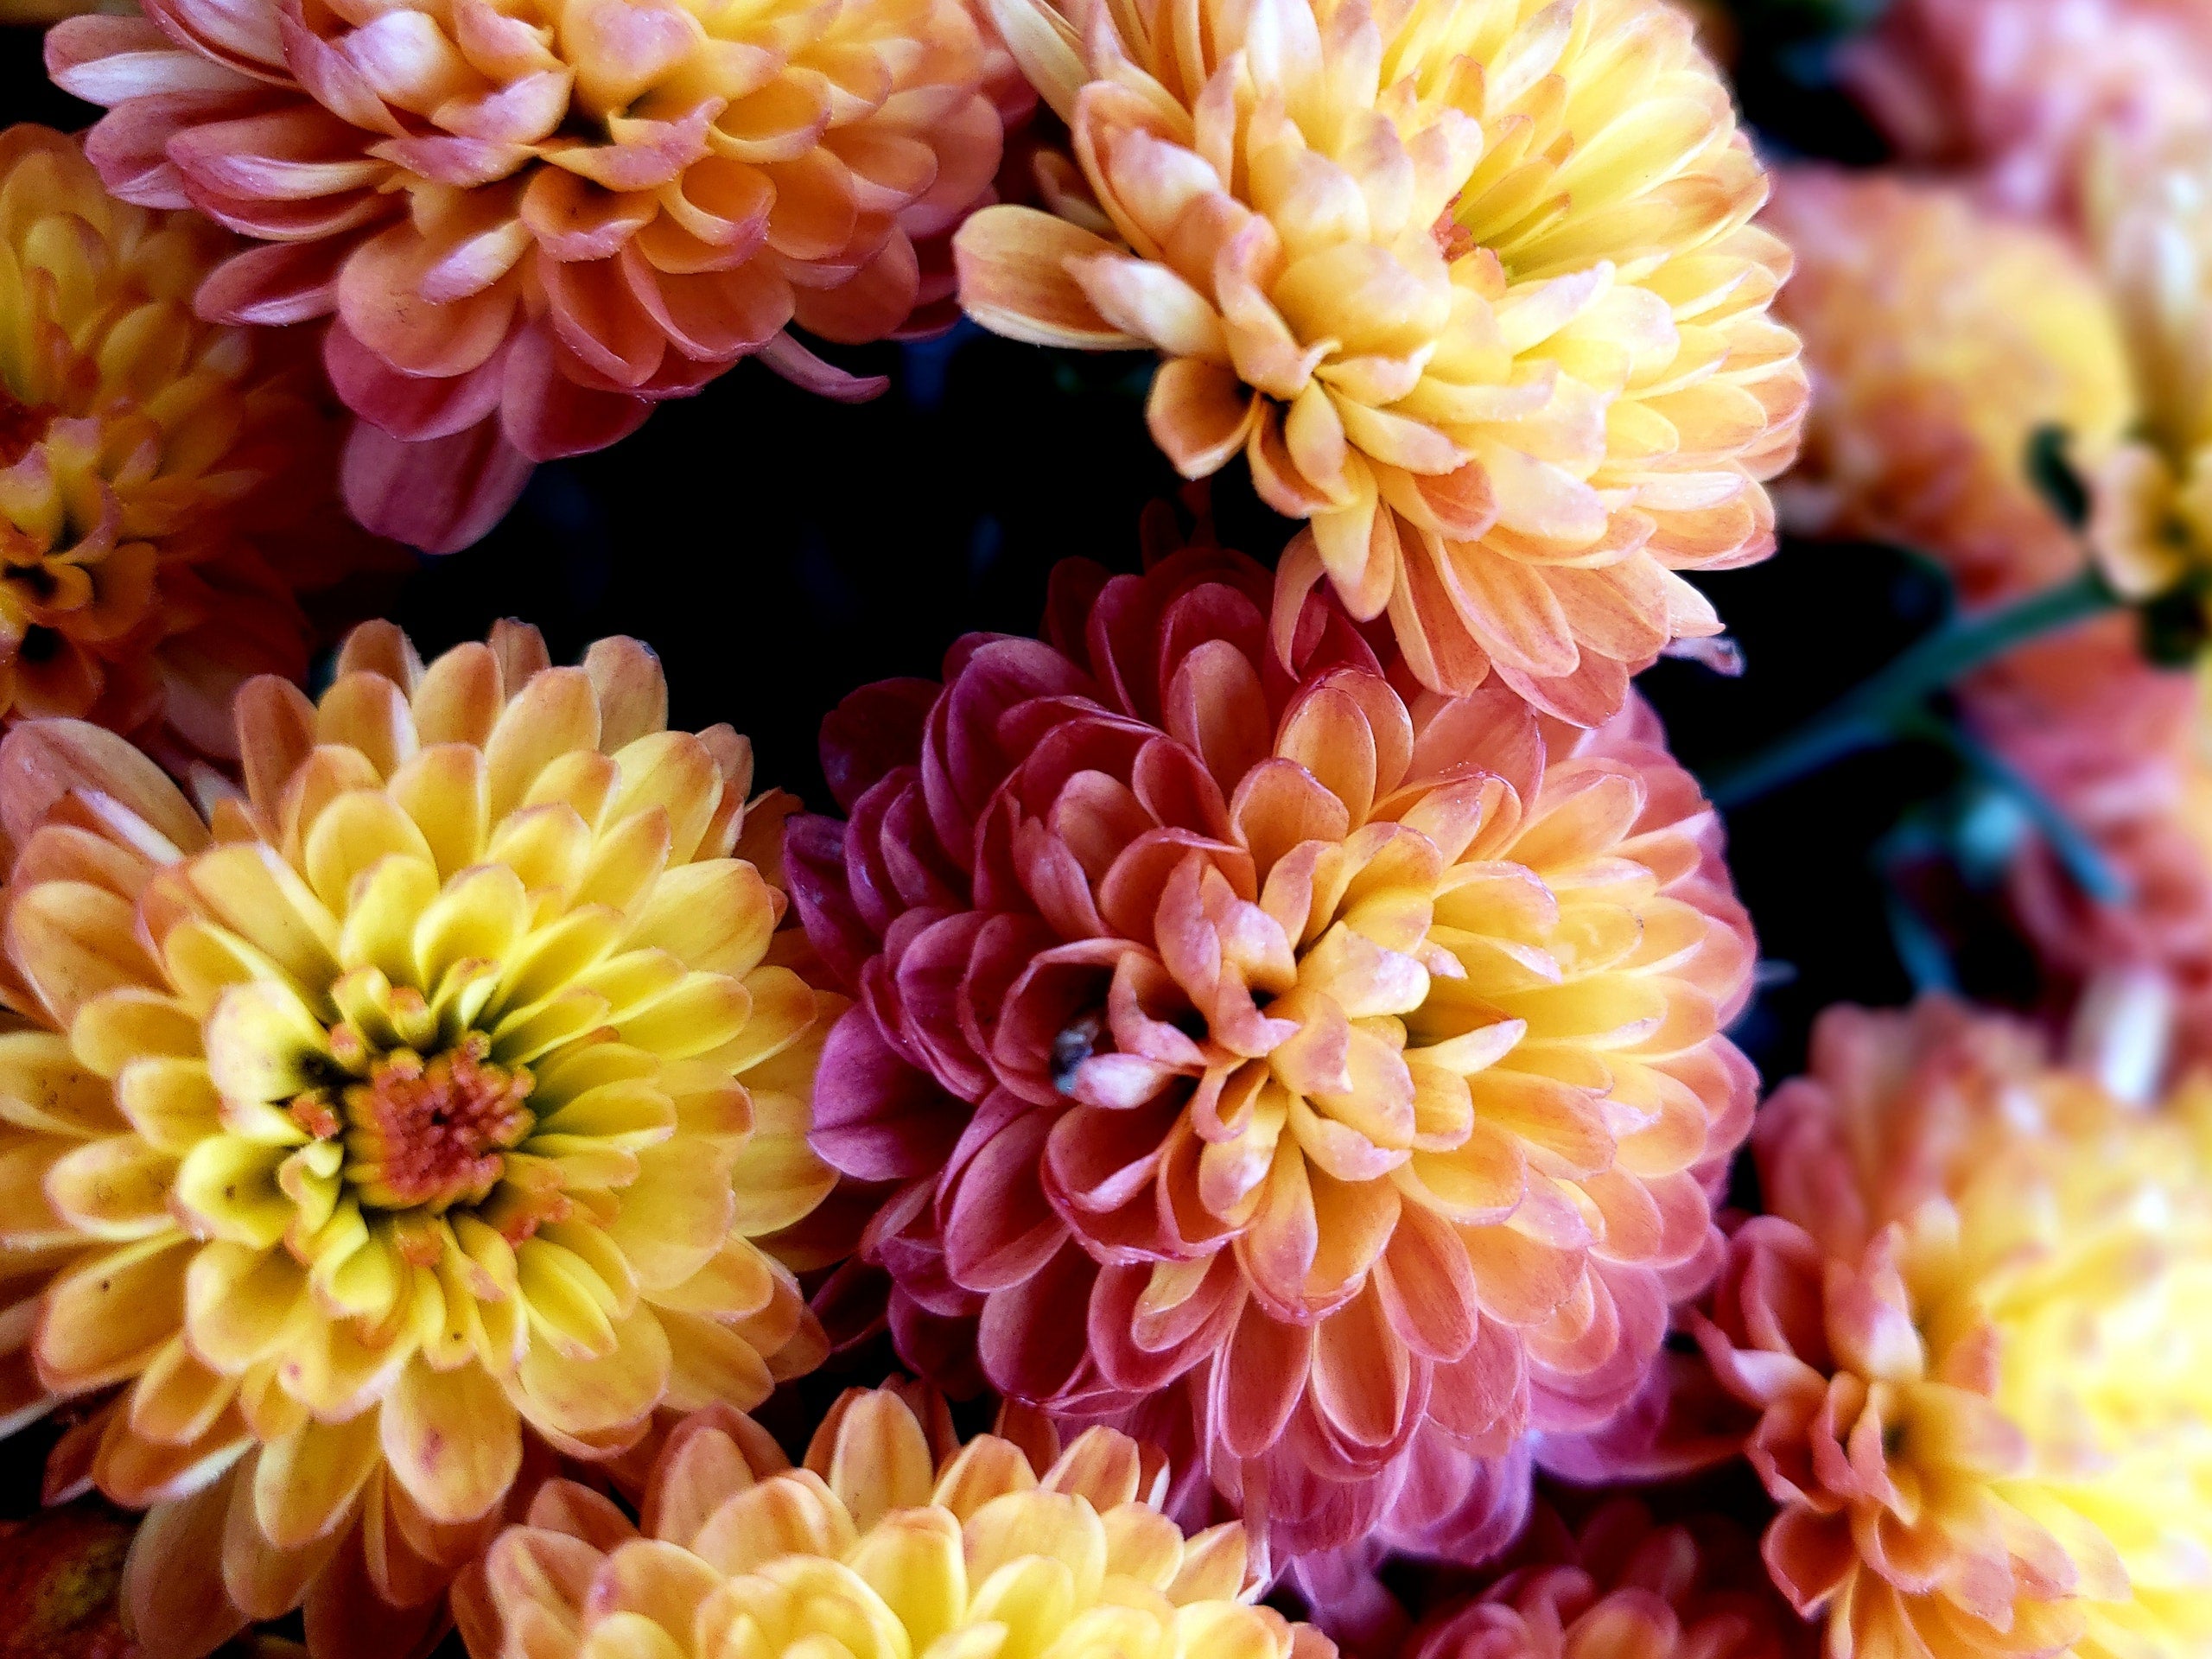 Help me with my Dahlia’s! Companion Plants to make sure I get the best flowers